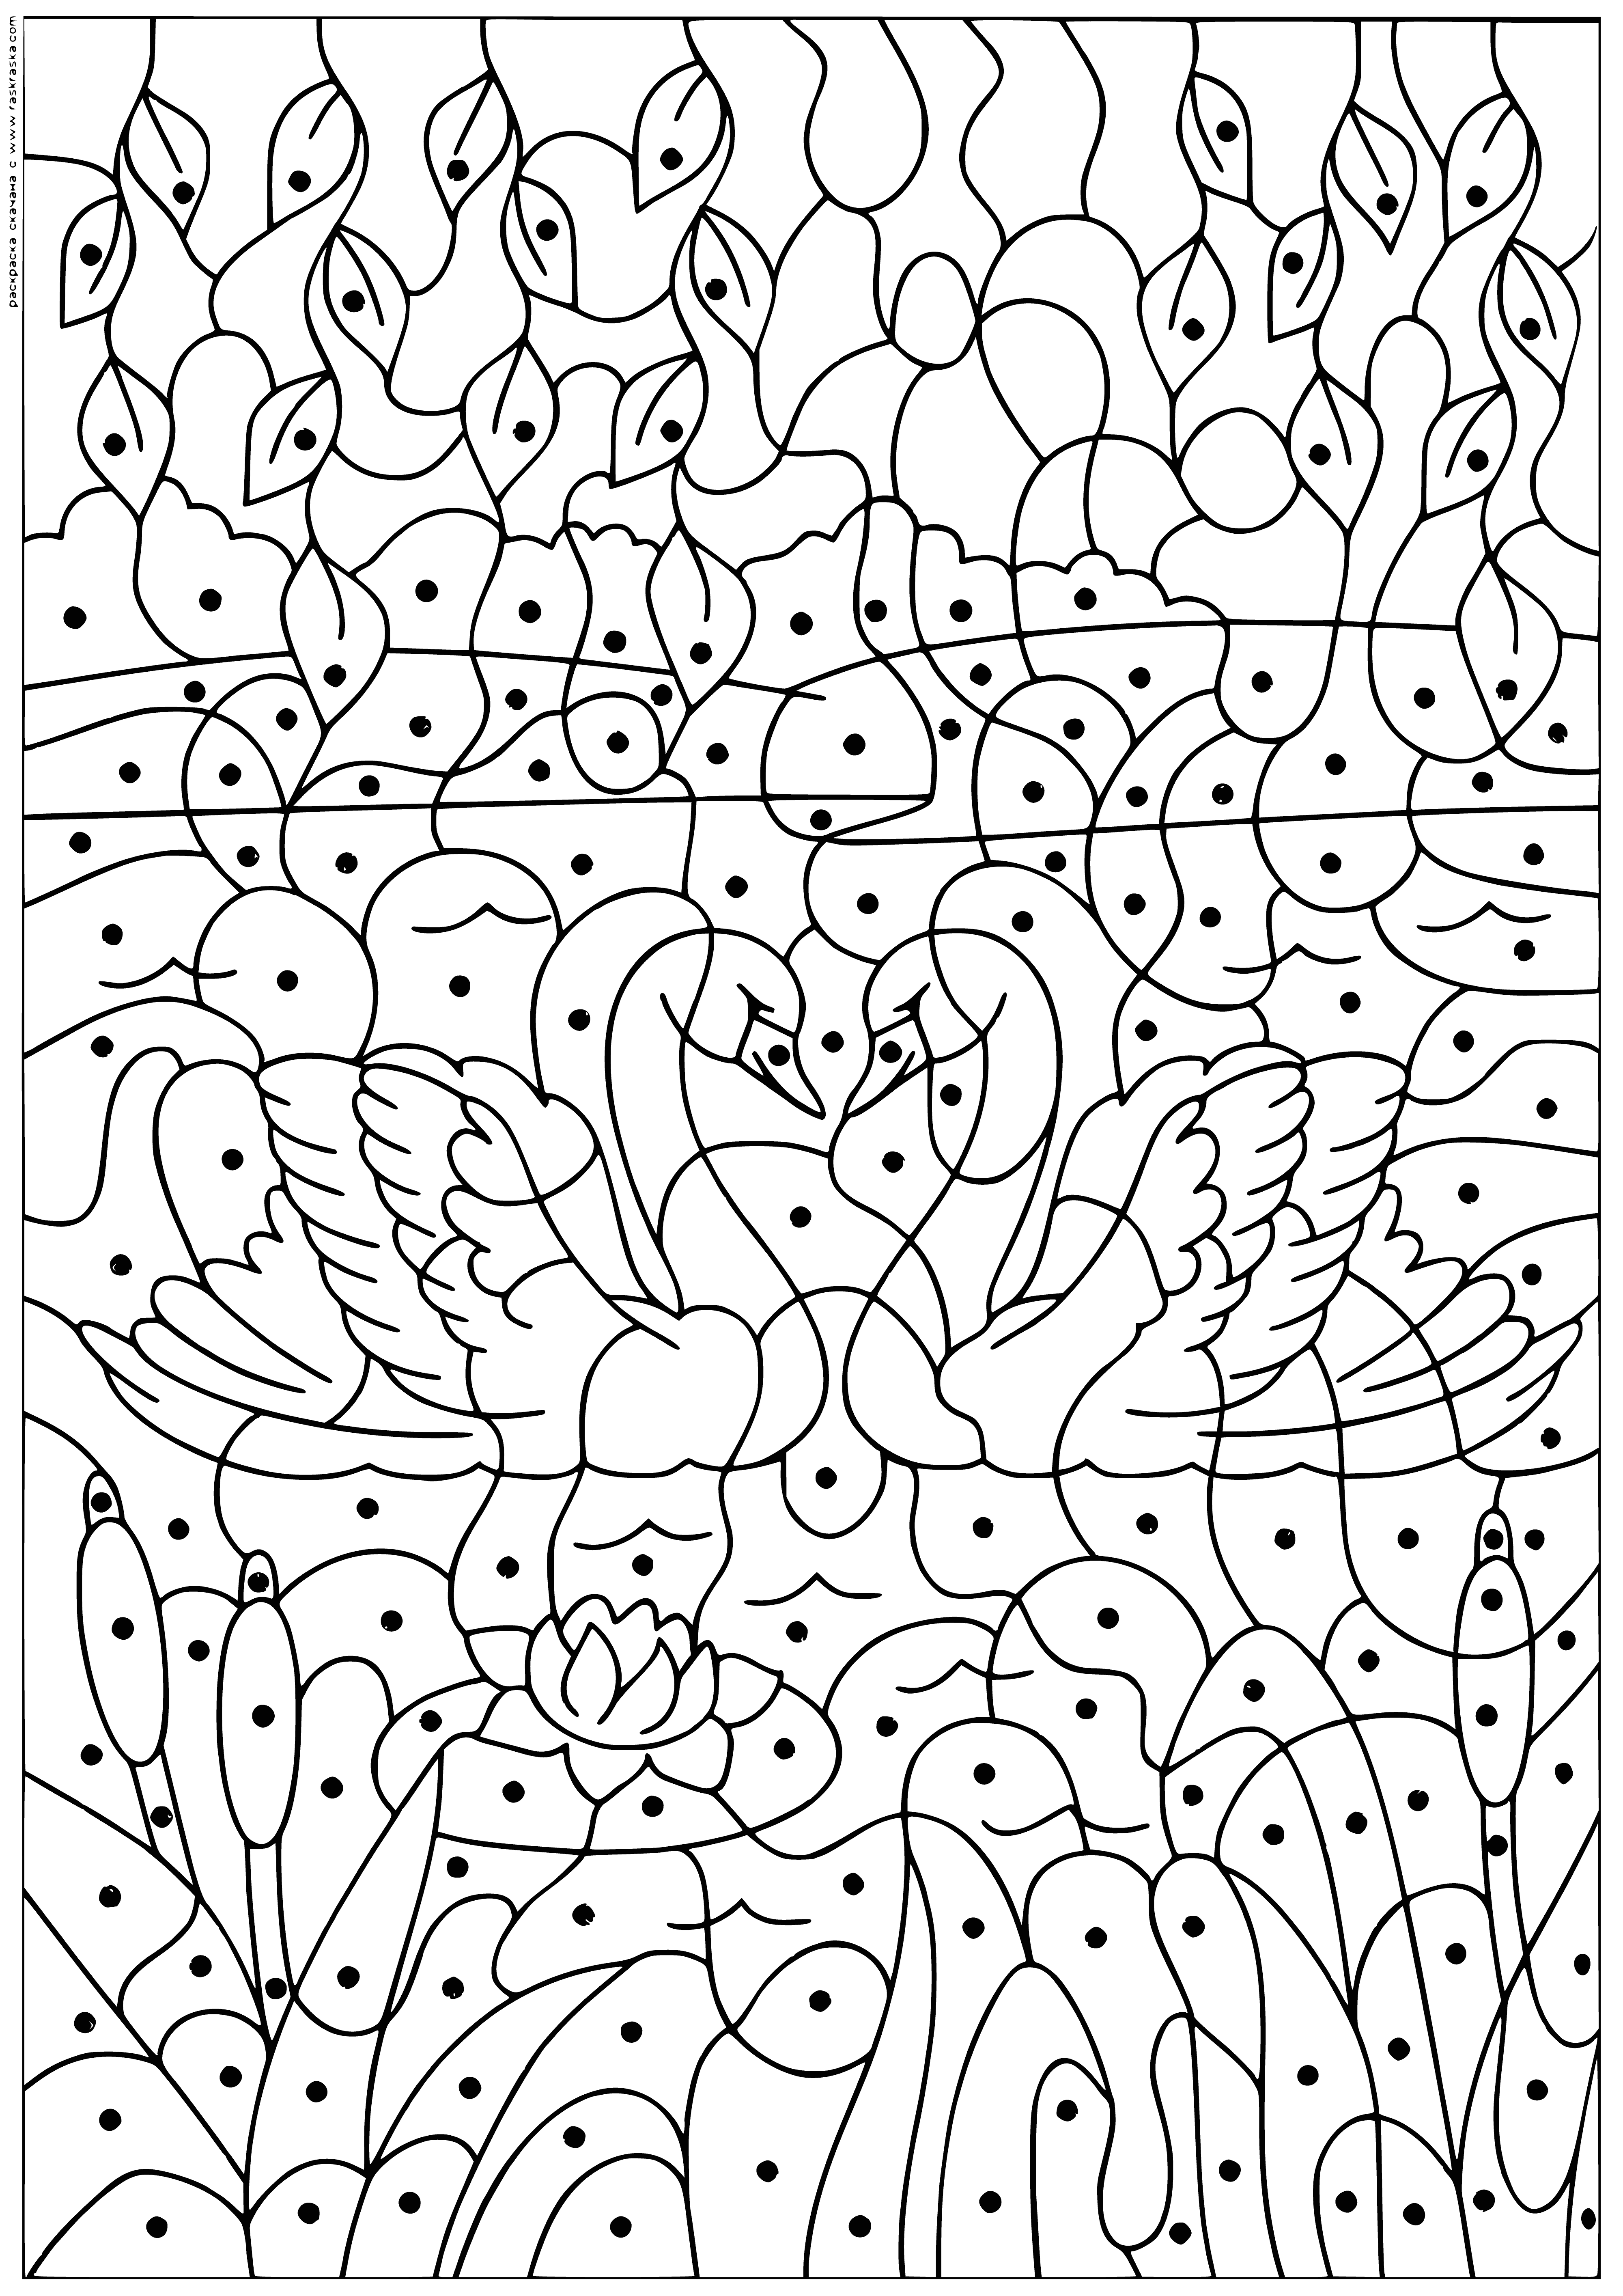 Swans coloring page